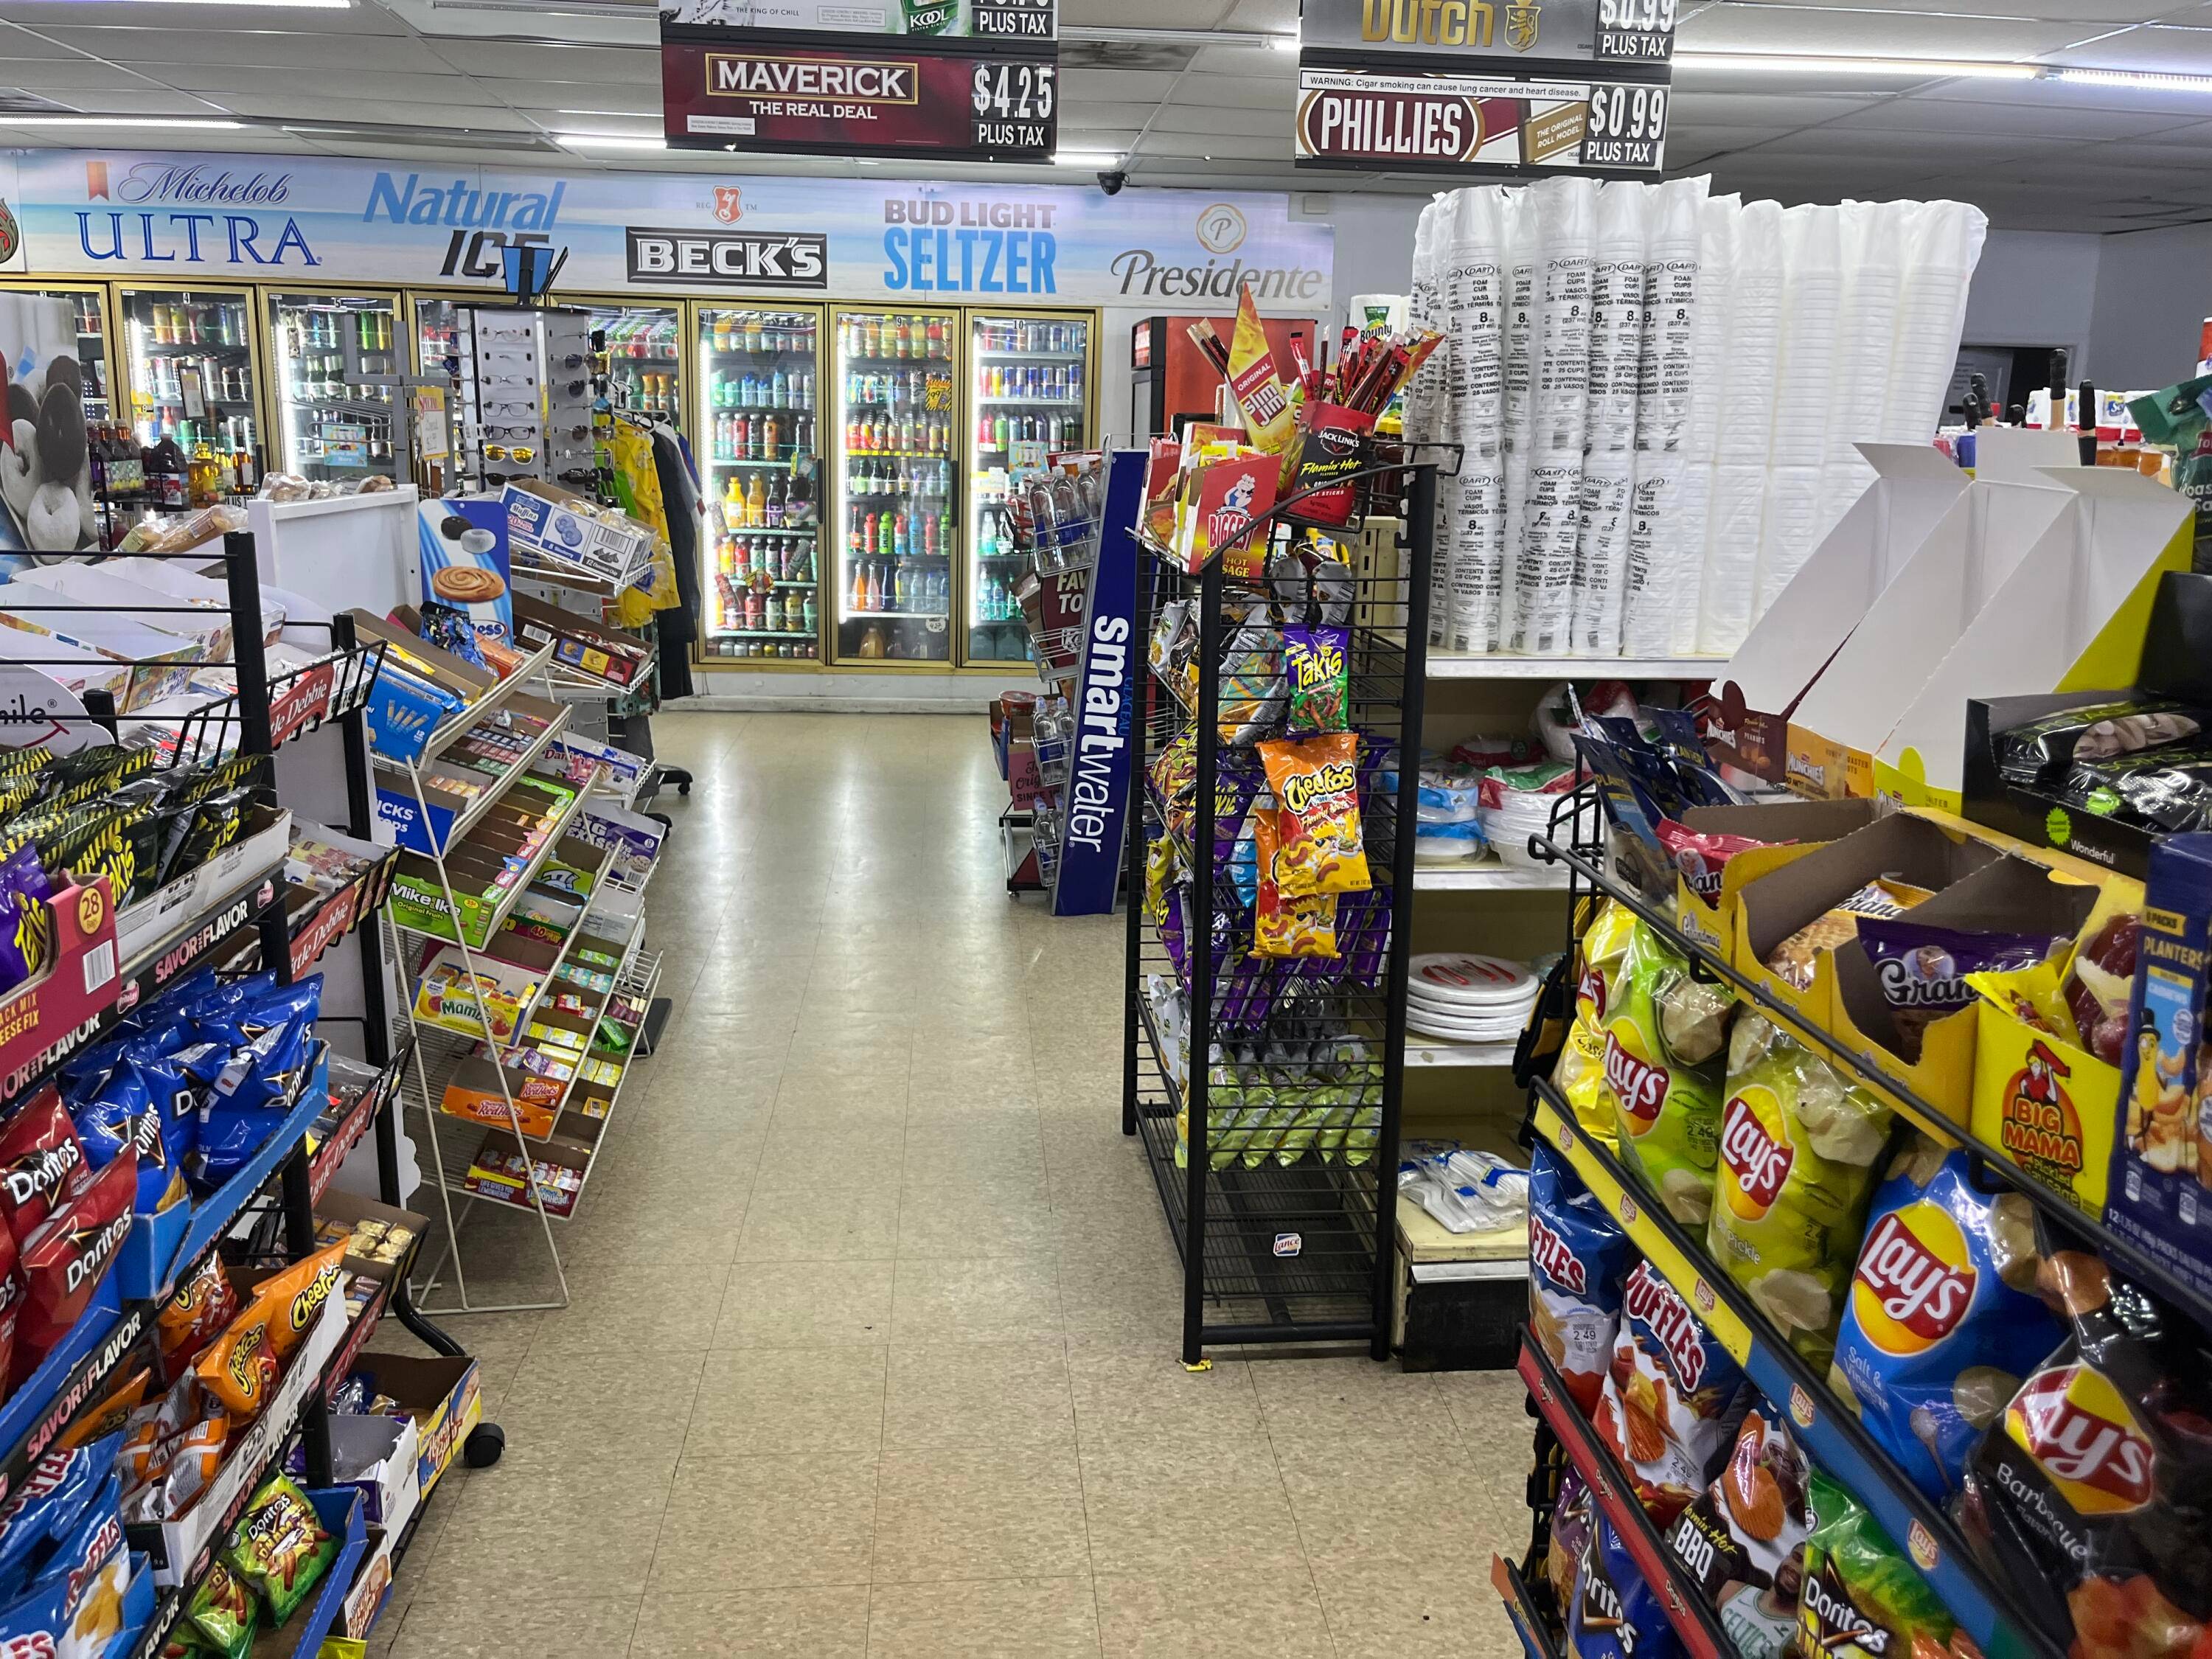 This Convenience Store is your one stop shop for all your daily needs.